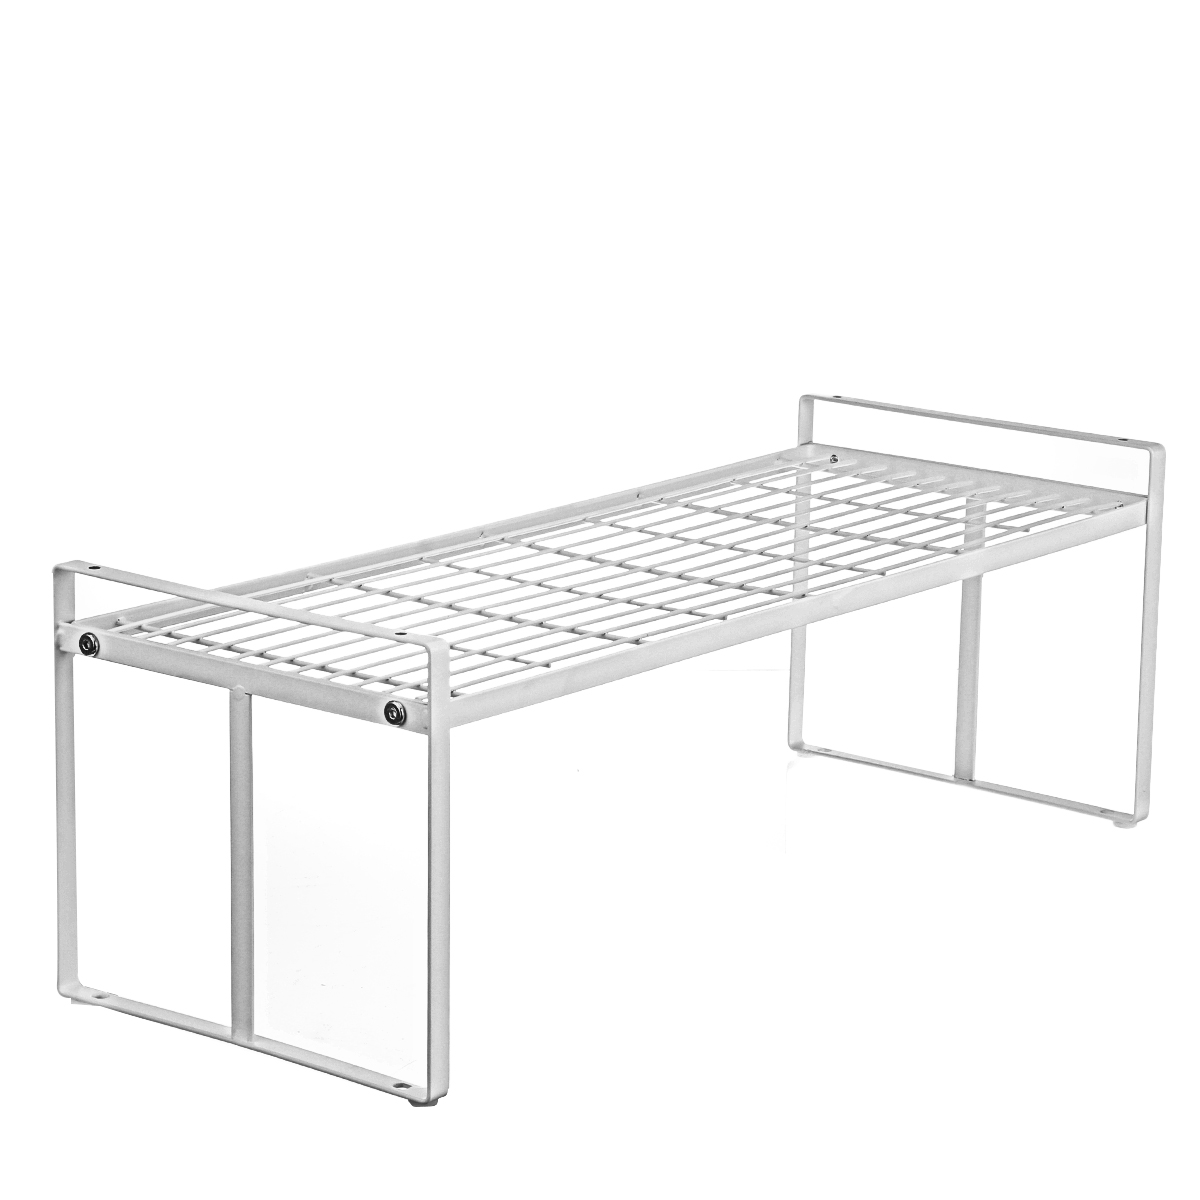 Find White Standing Rack Kitchen Bathroom Countertop Storage Organizer Shelf Holder for Sale on Gipsybee.com with cryptocurrencies